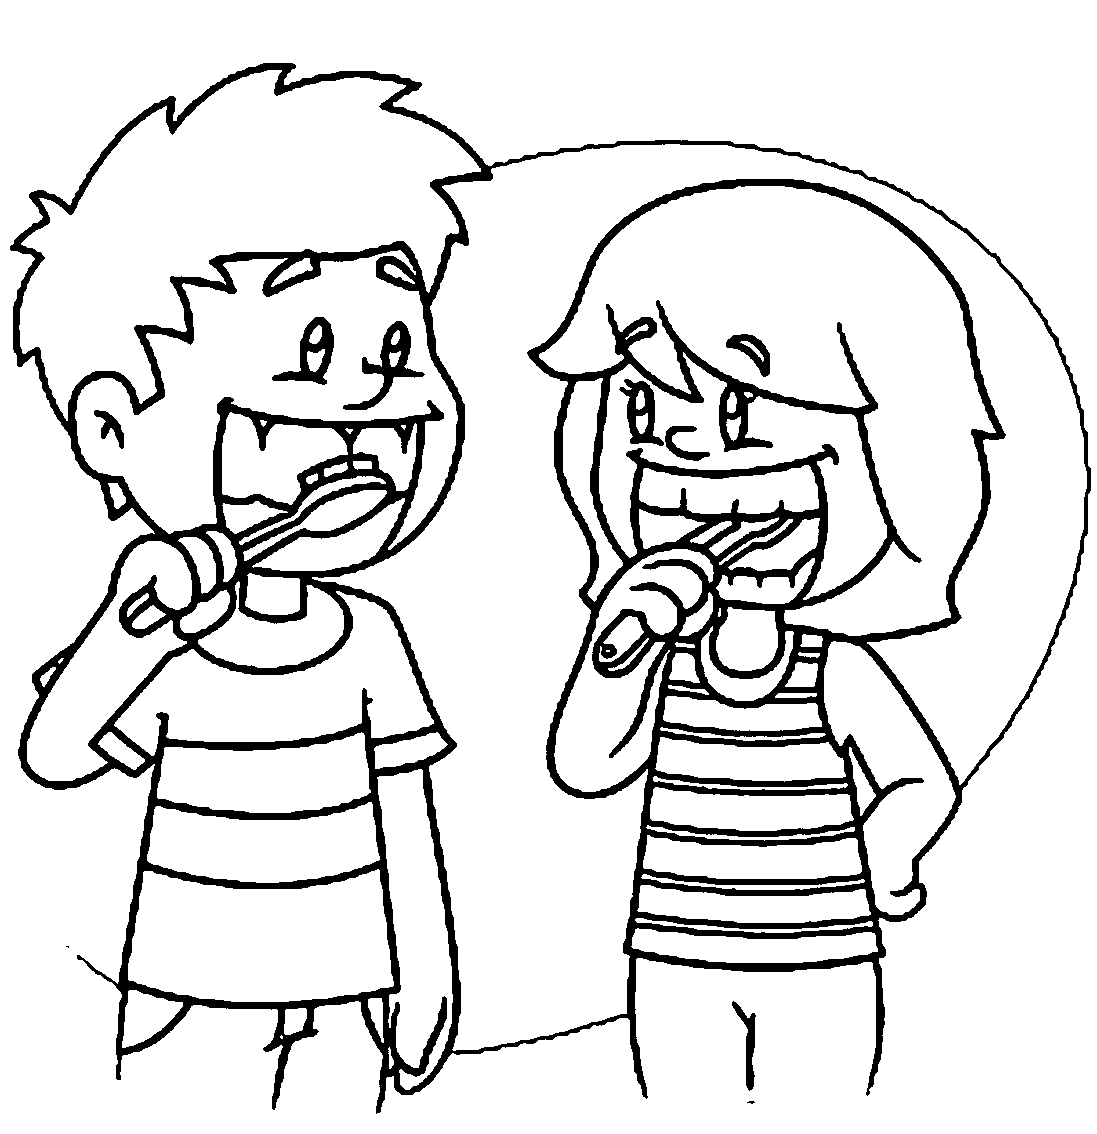 Boy Brushing Teeth Coloring Page - High Quality Coloring Pages